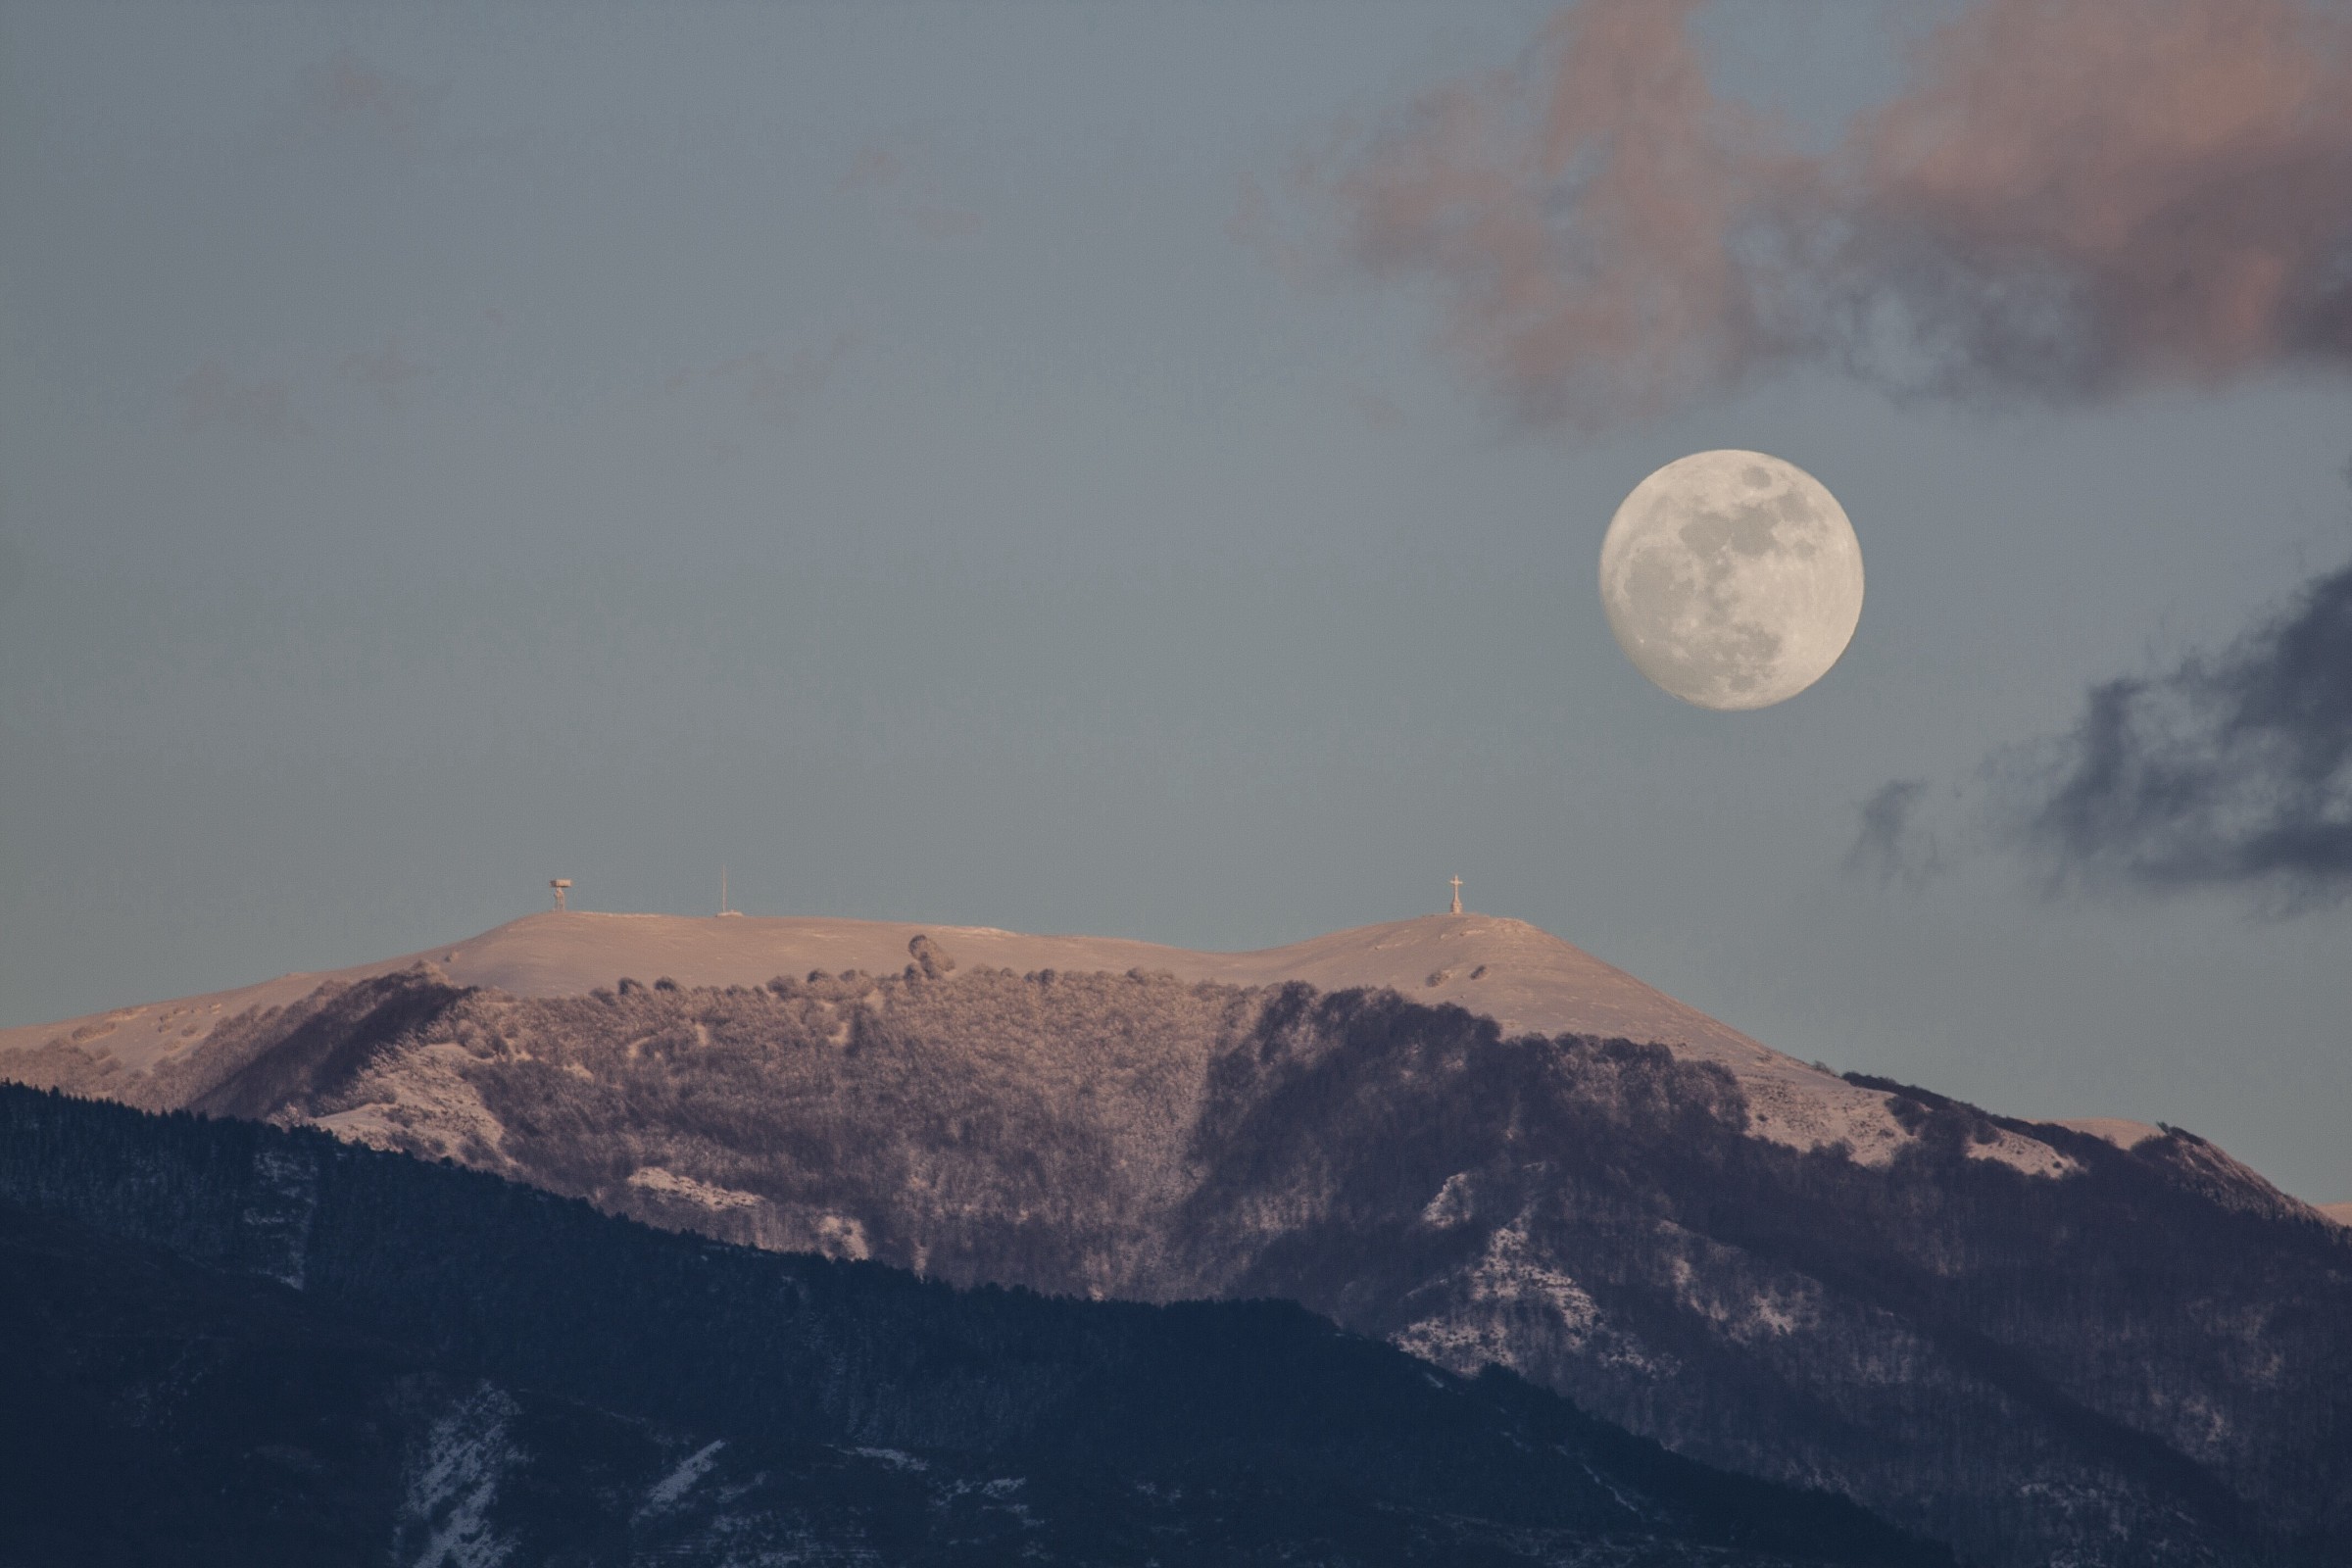 The moon and the mountain...